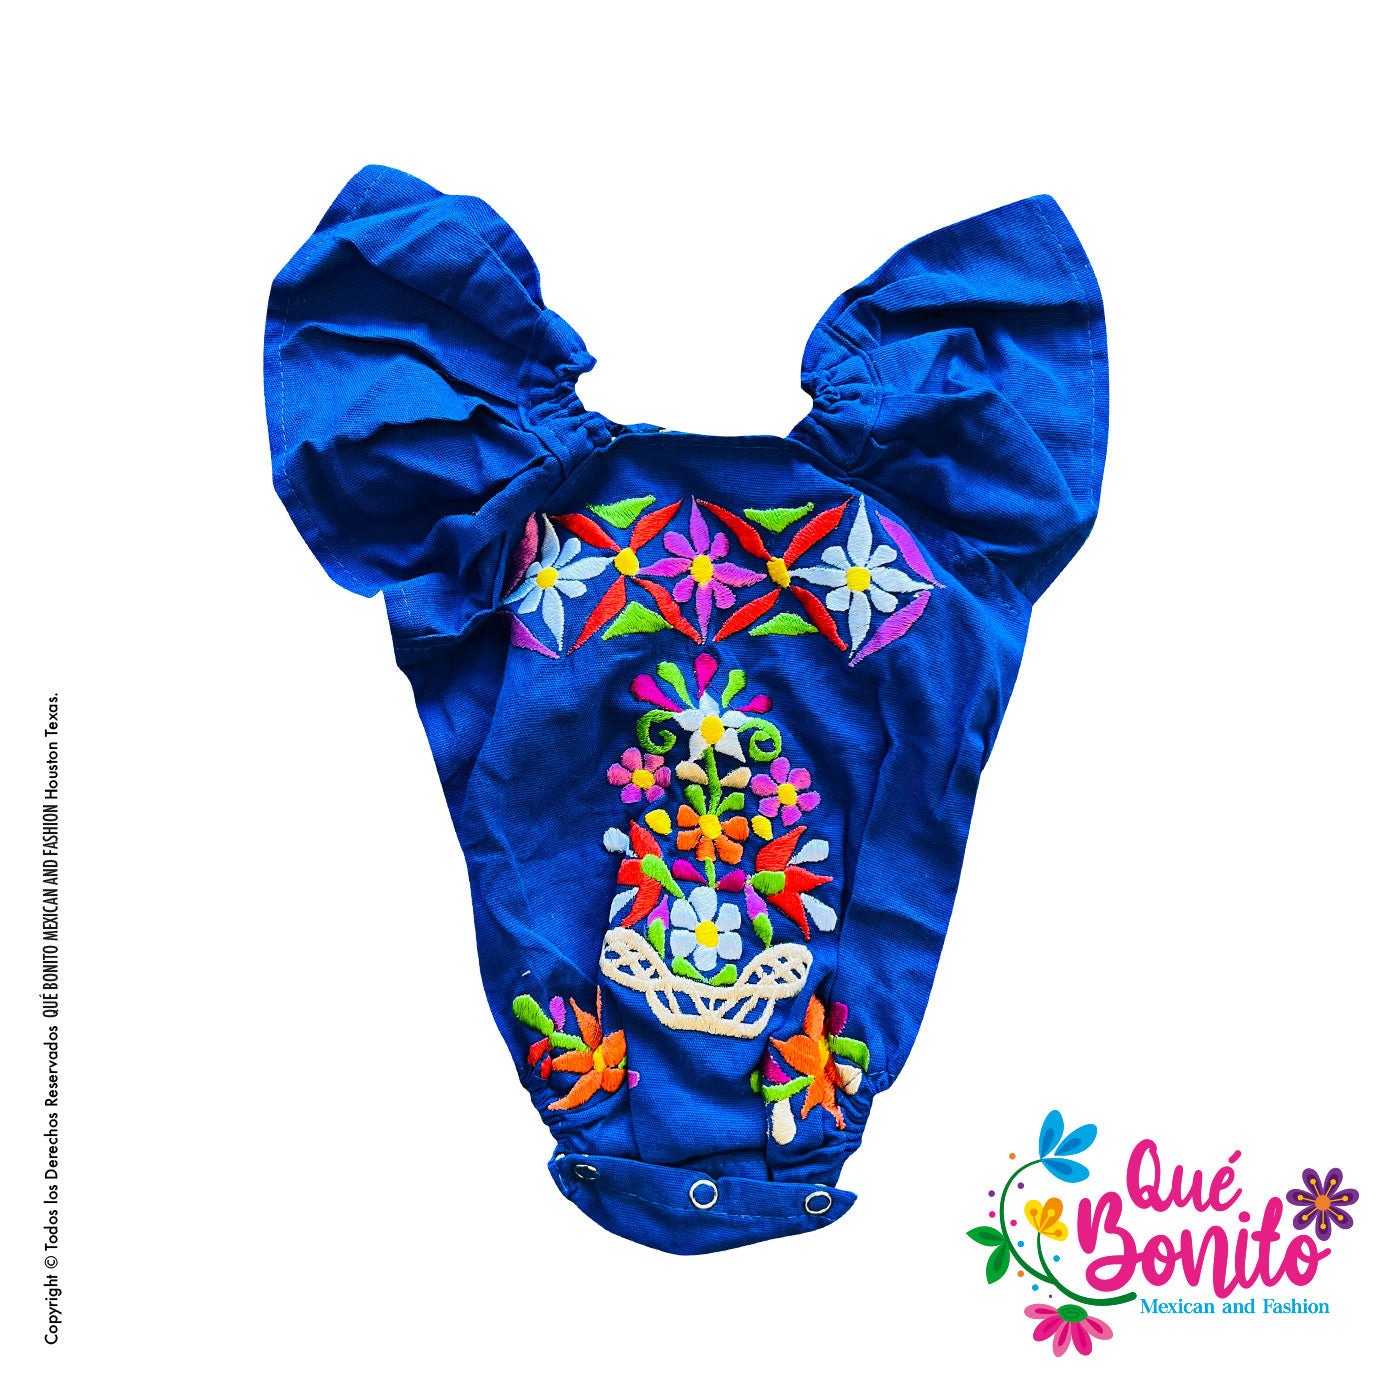 Baby Royal Blue Onesie  Que Bonito Mexican and Fashion